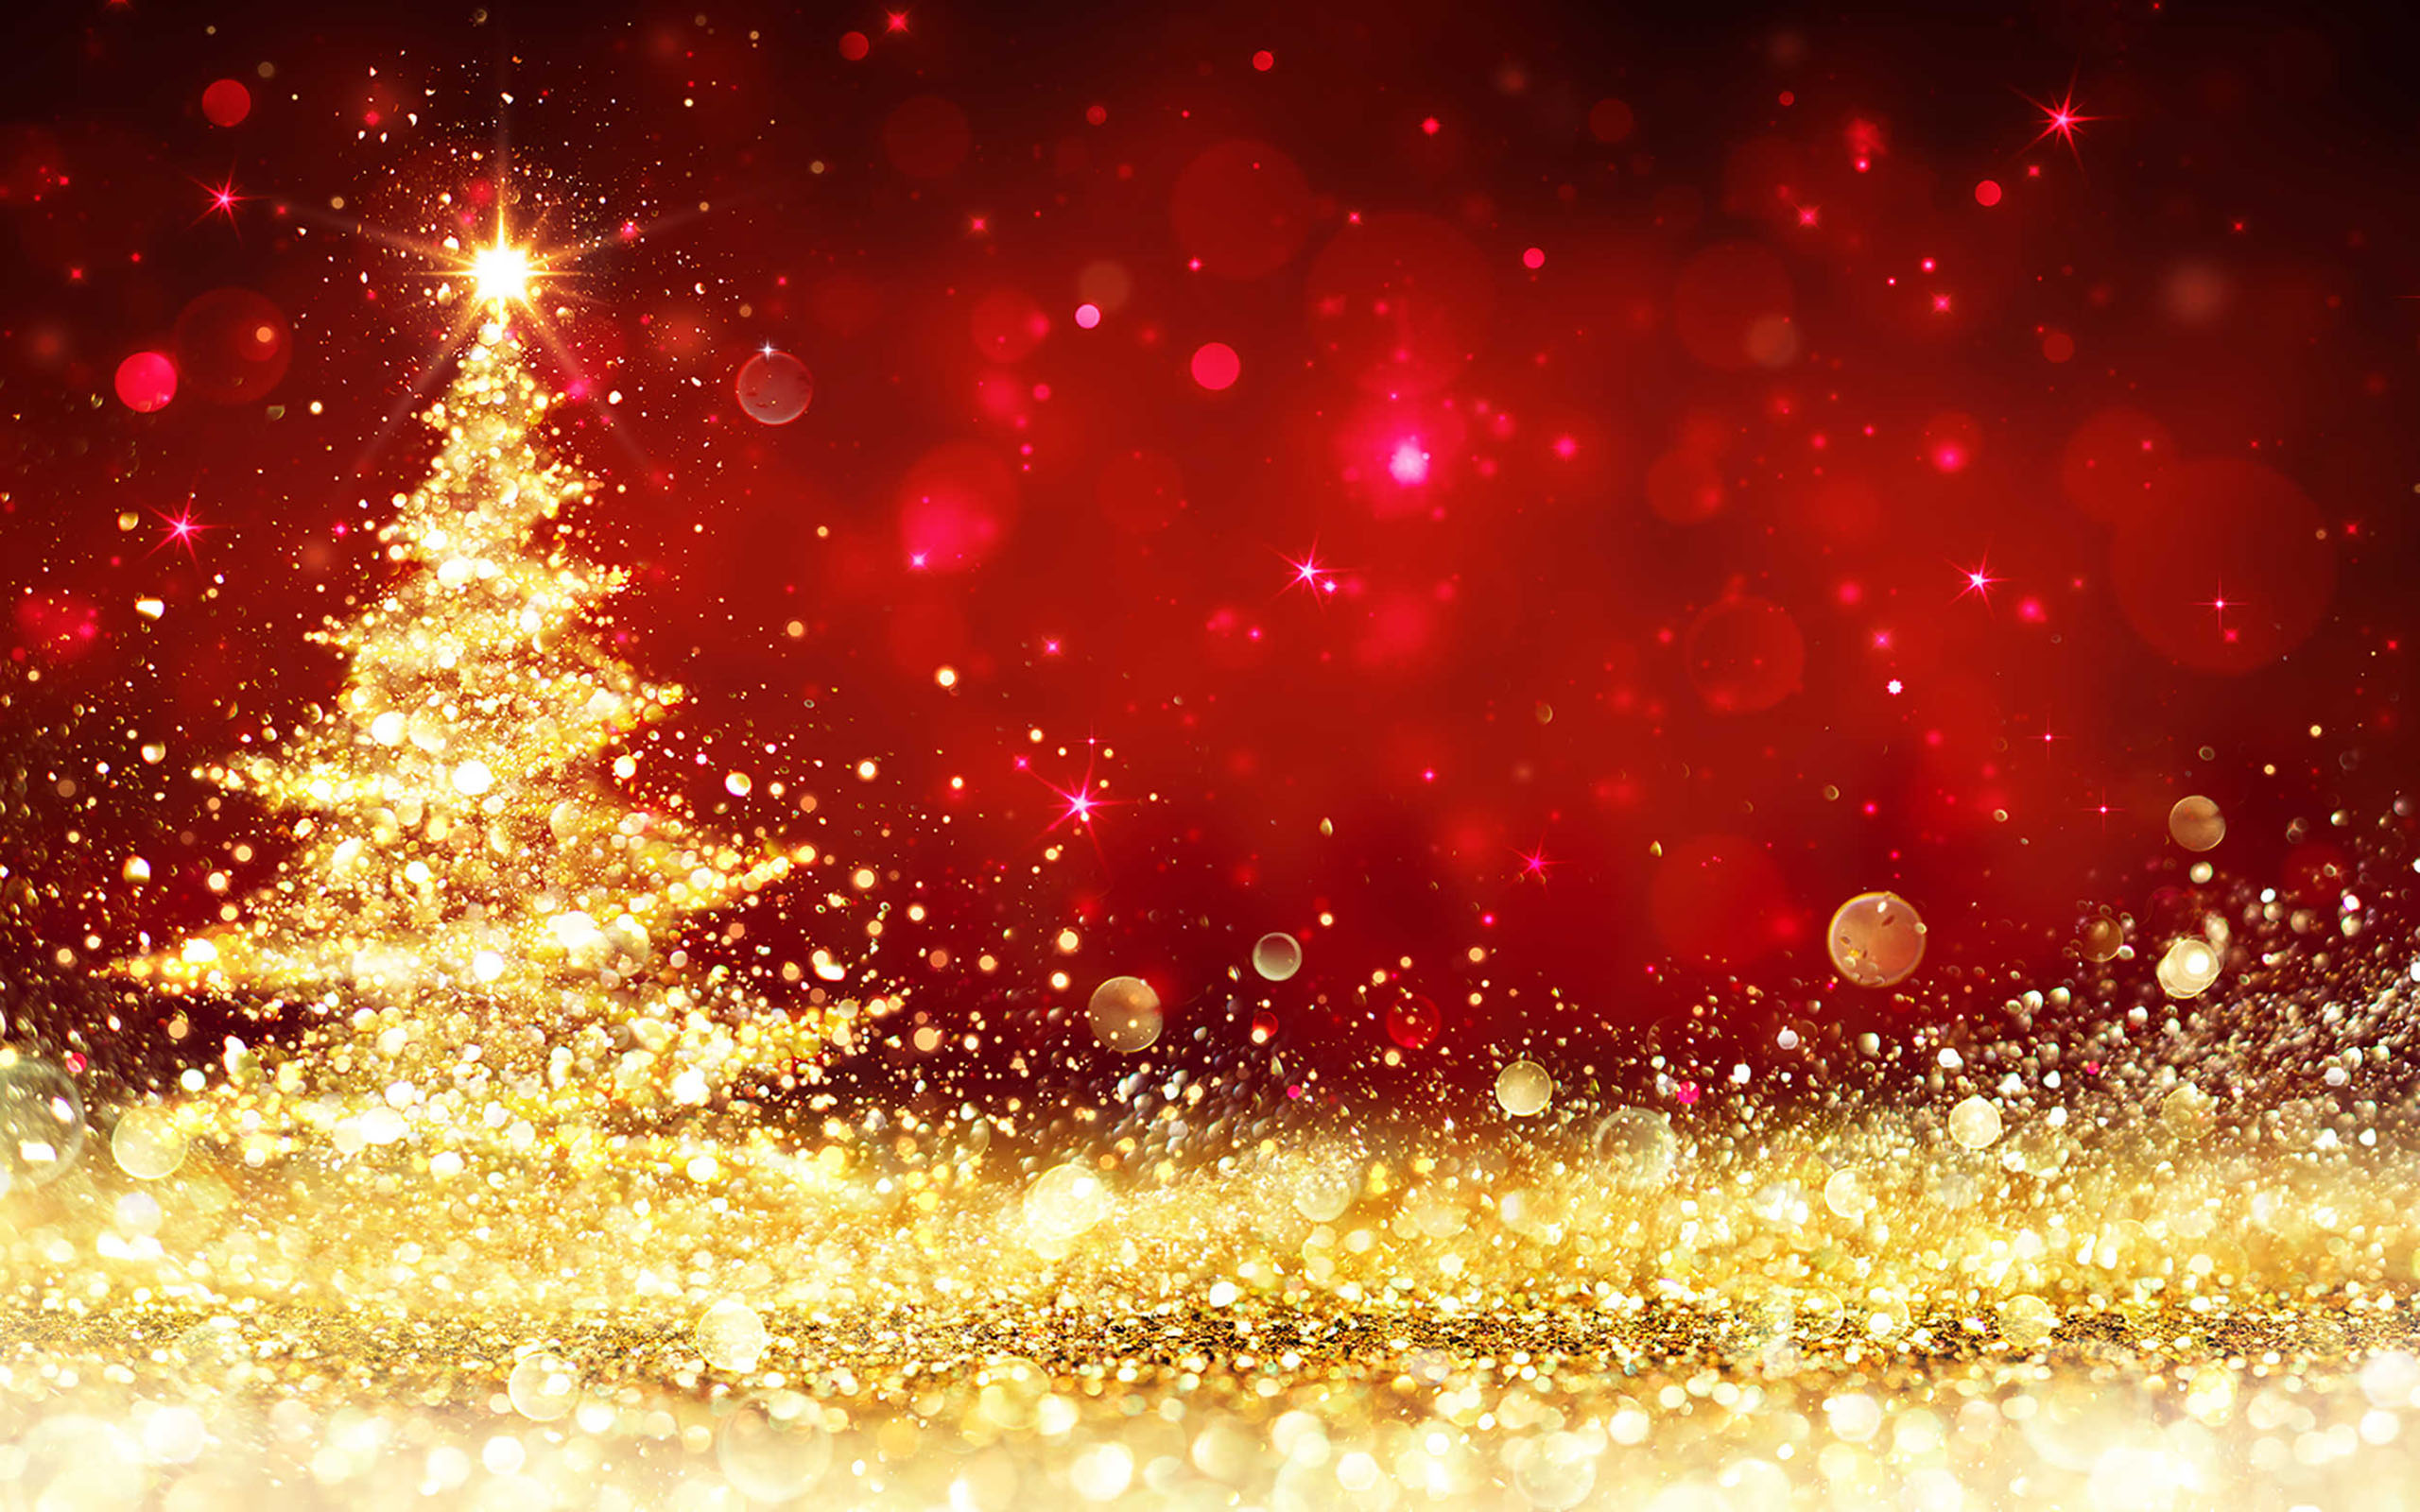 Christmas Tree Red Gold Christmas Background Image, Wallpaper13.com